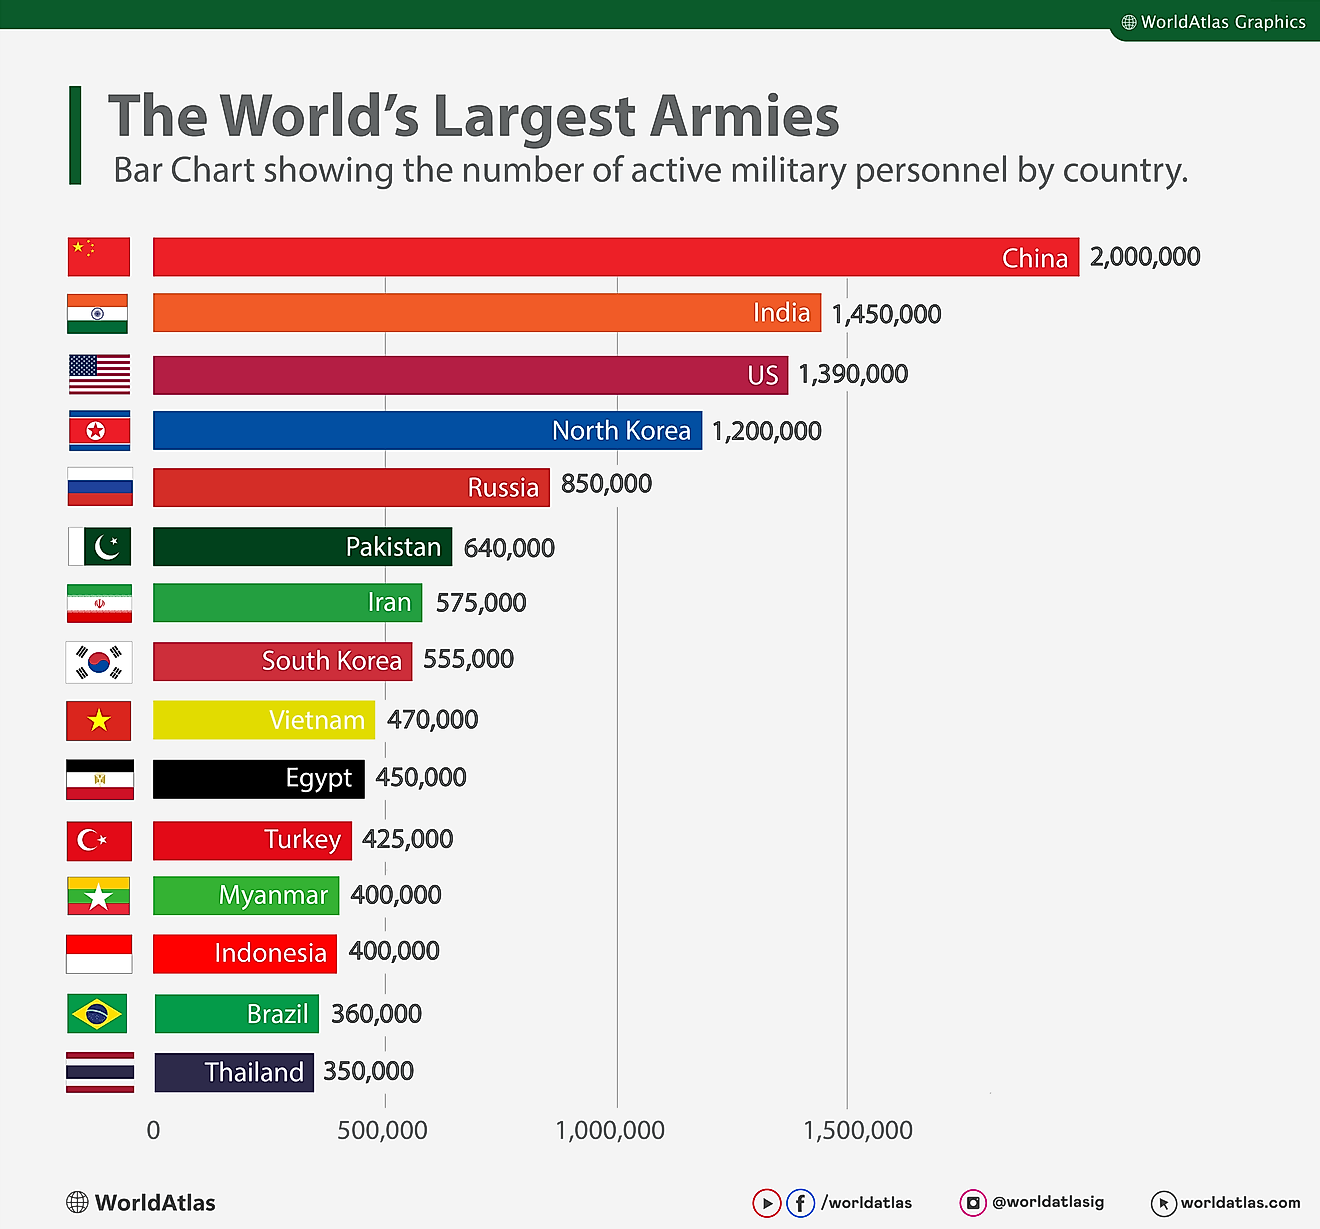 bar chart showing the largest armies in the world by country